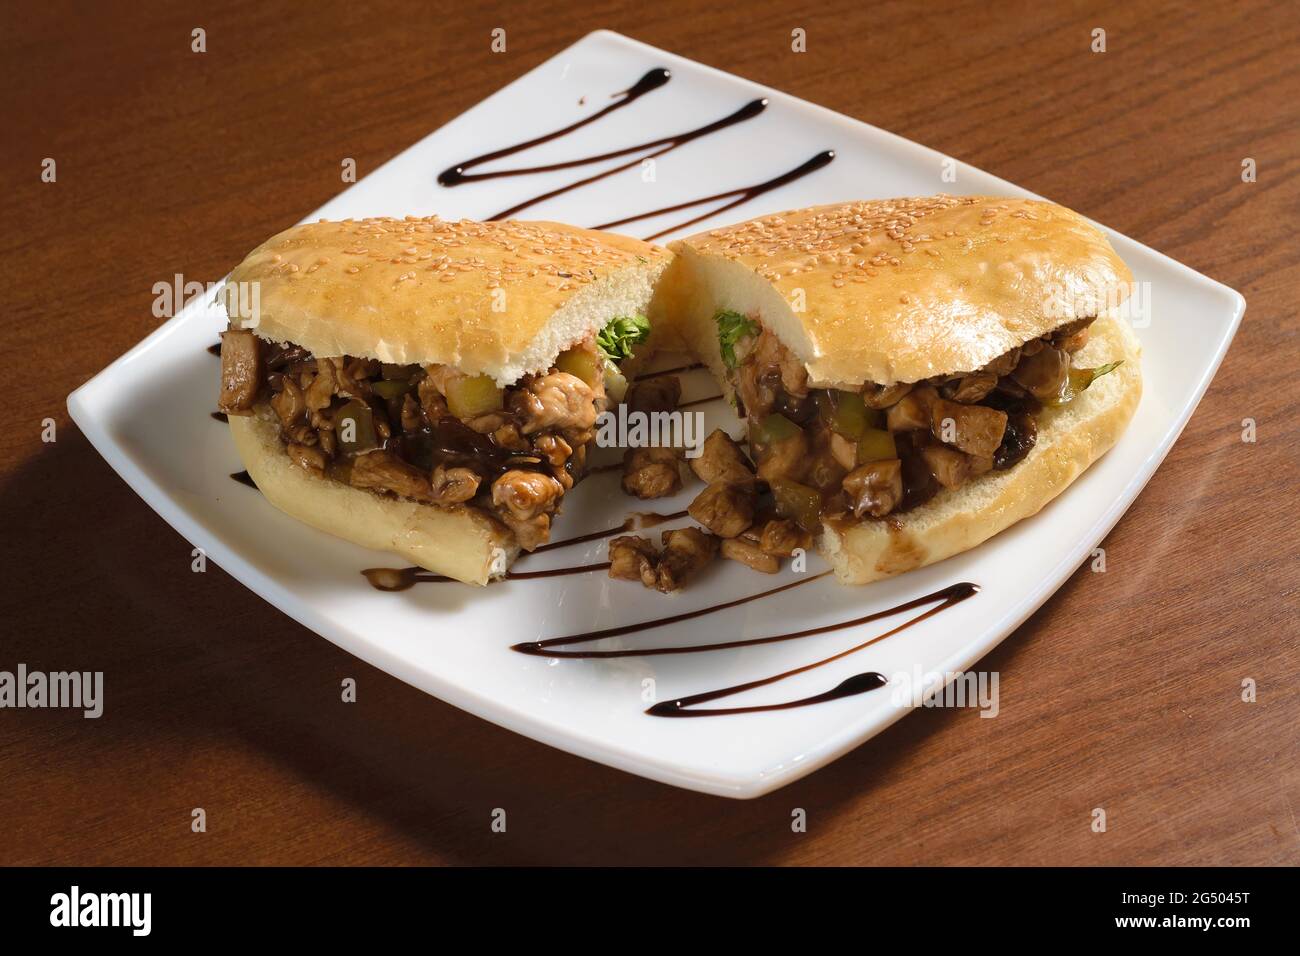 Pulled sandwich with pieces of fried chicken meat and pickles on a plate Stock Photo